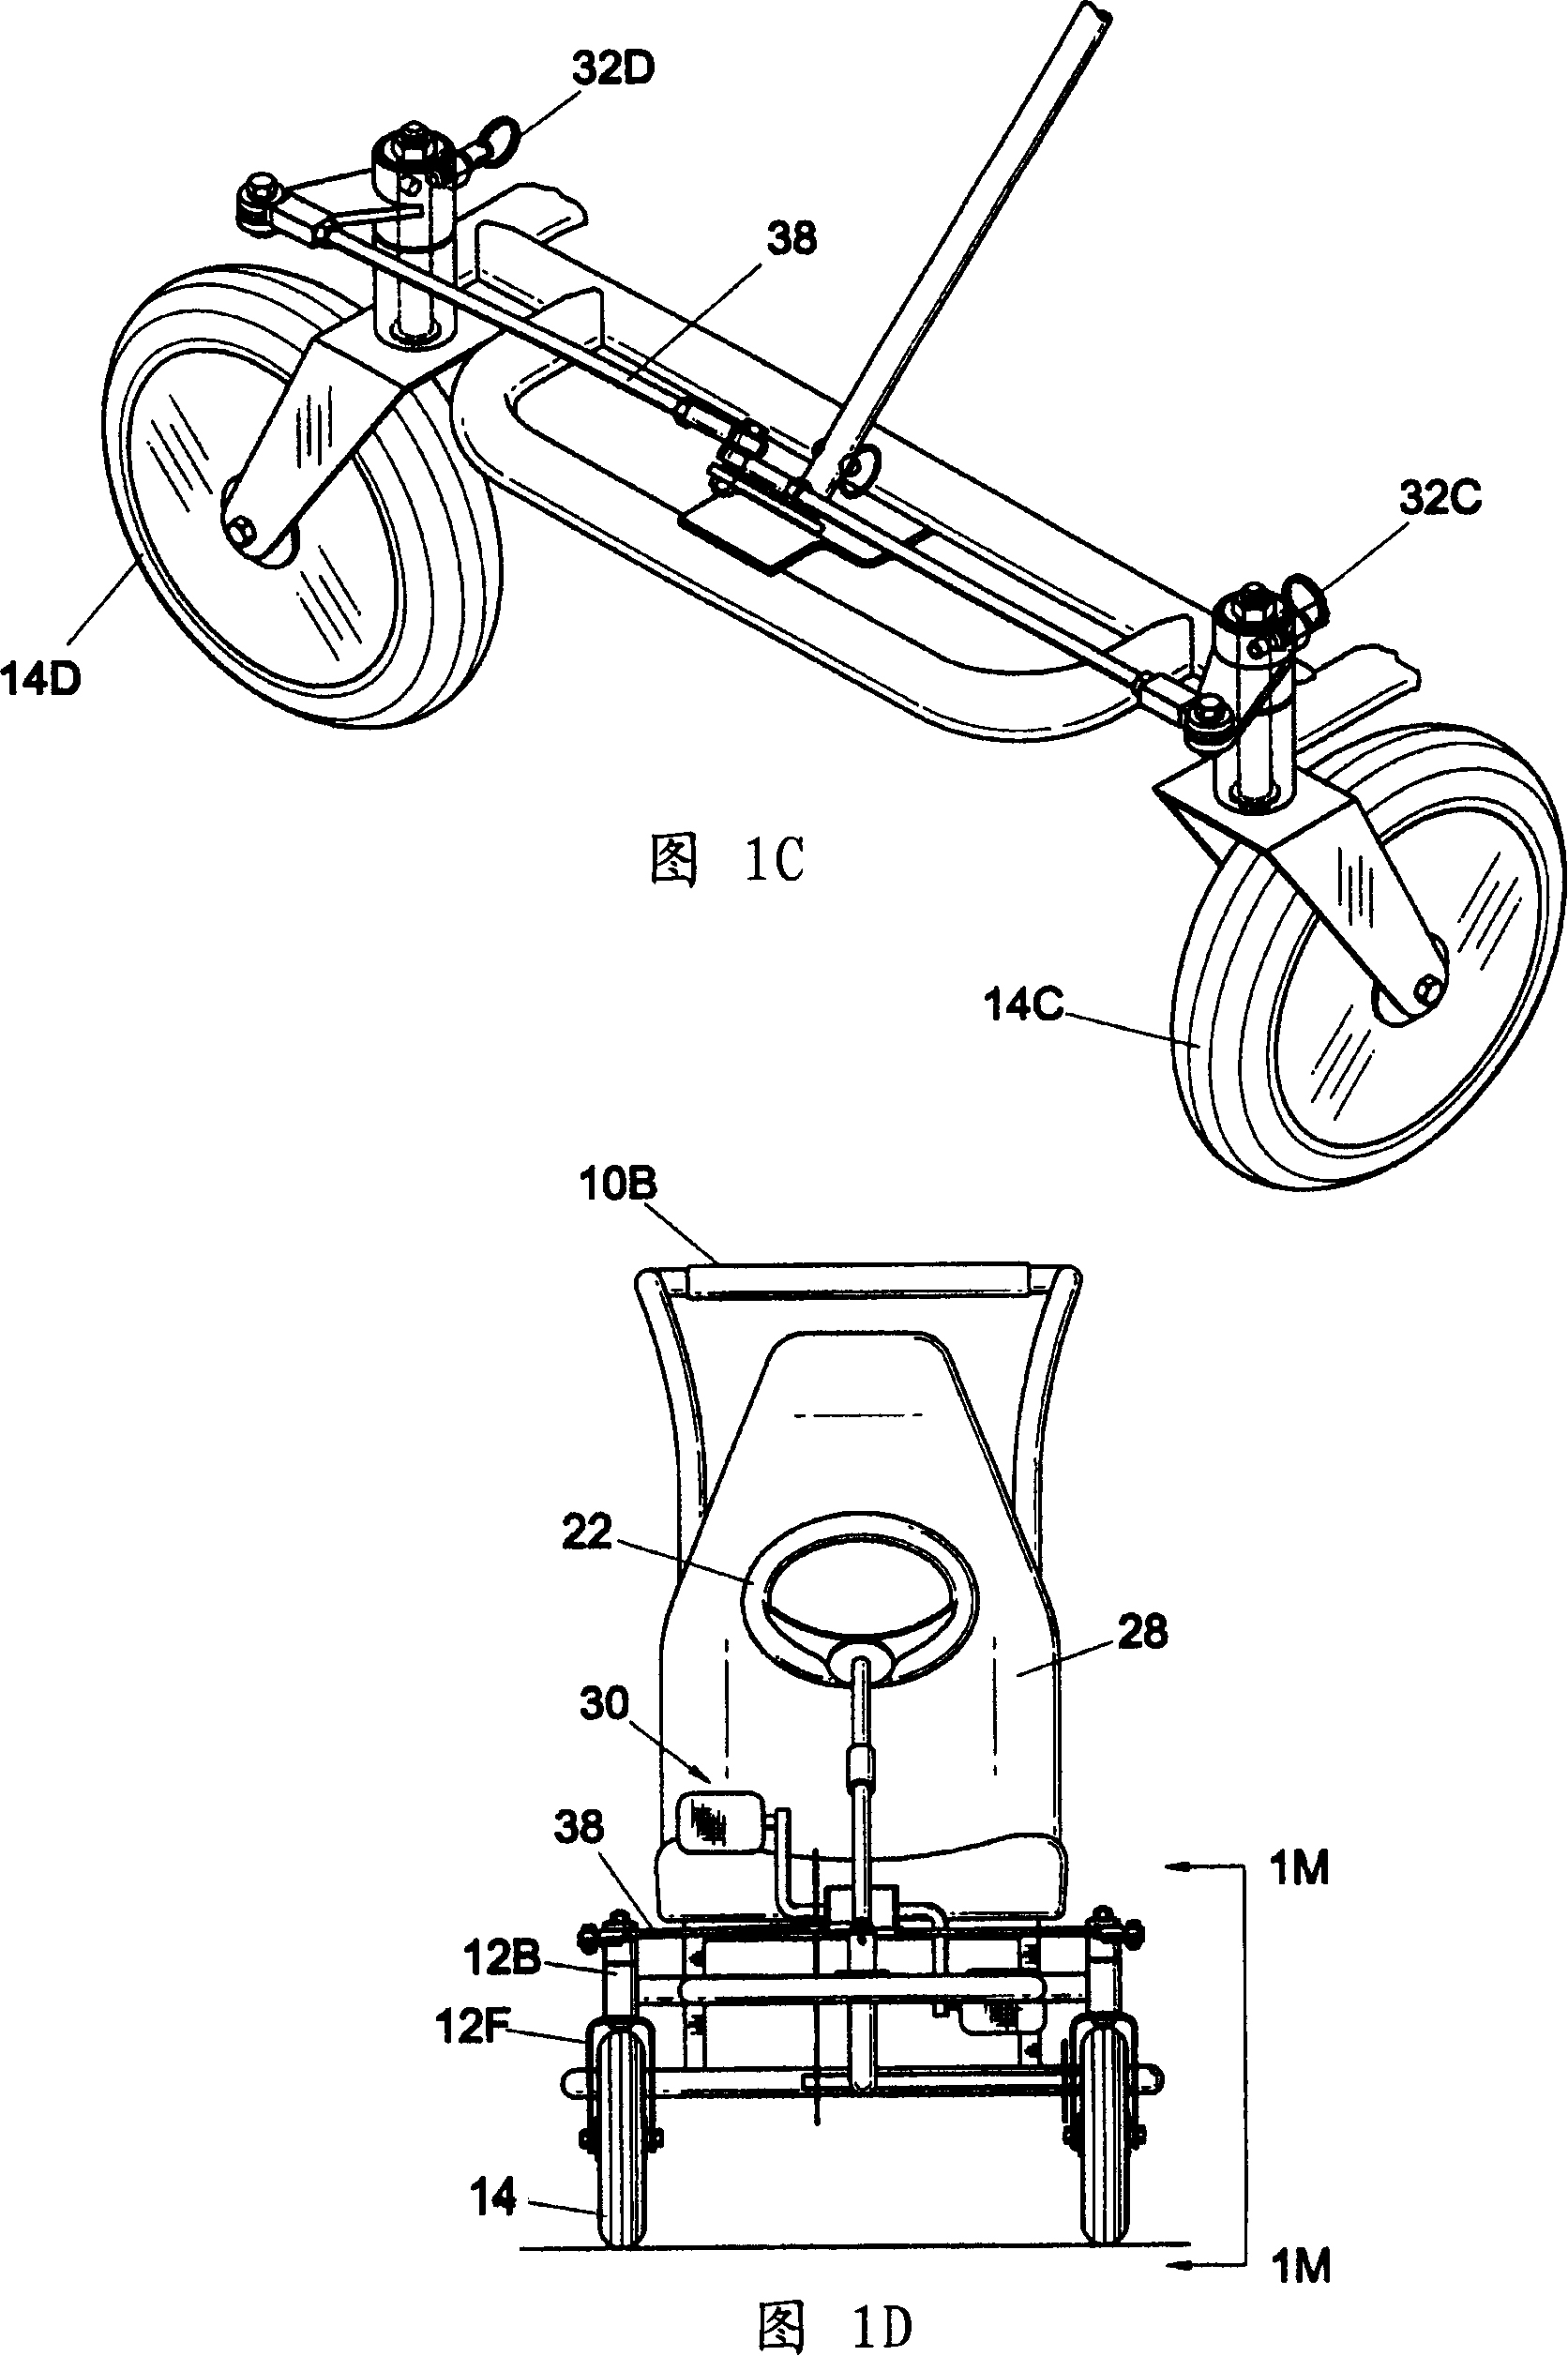 Vehicle with swivel control of casters for enabling rider or external steering